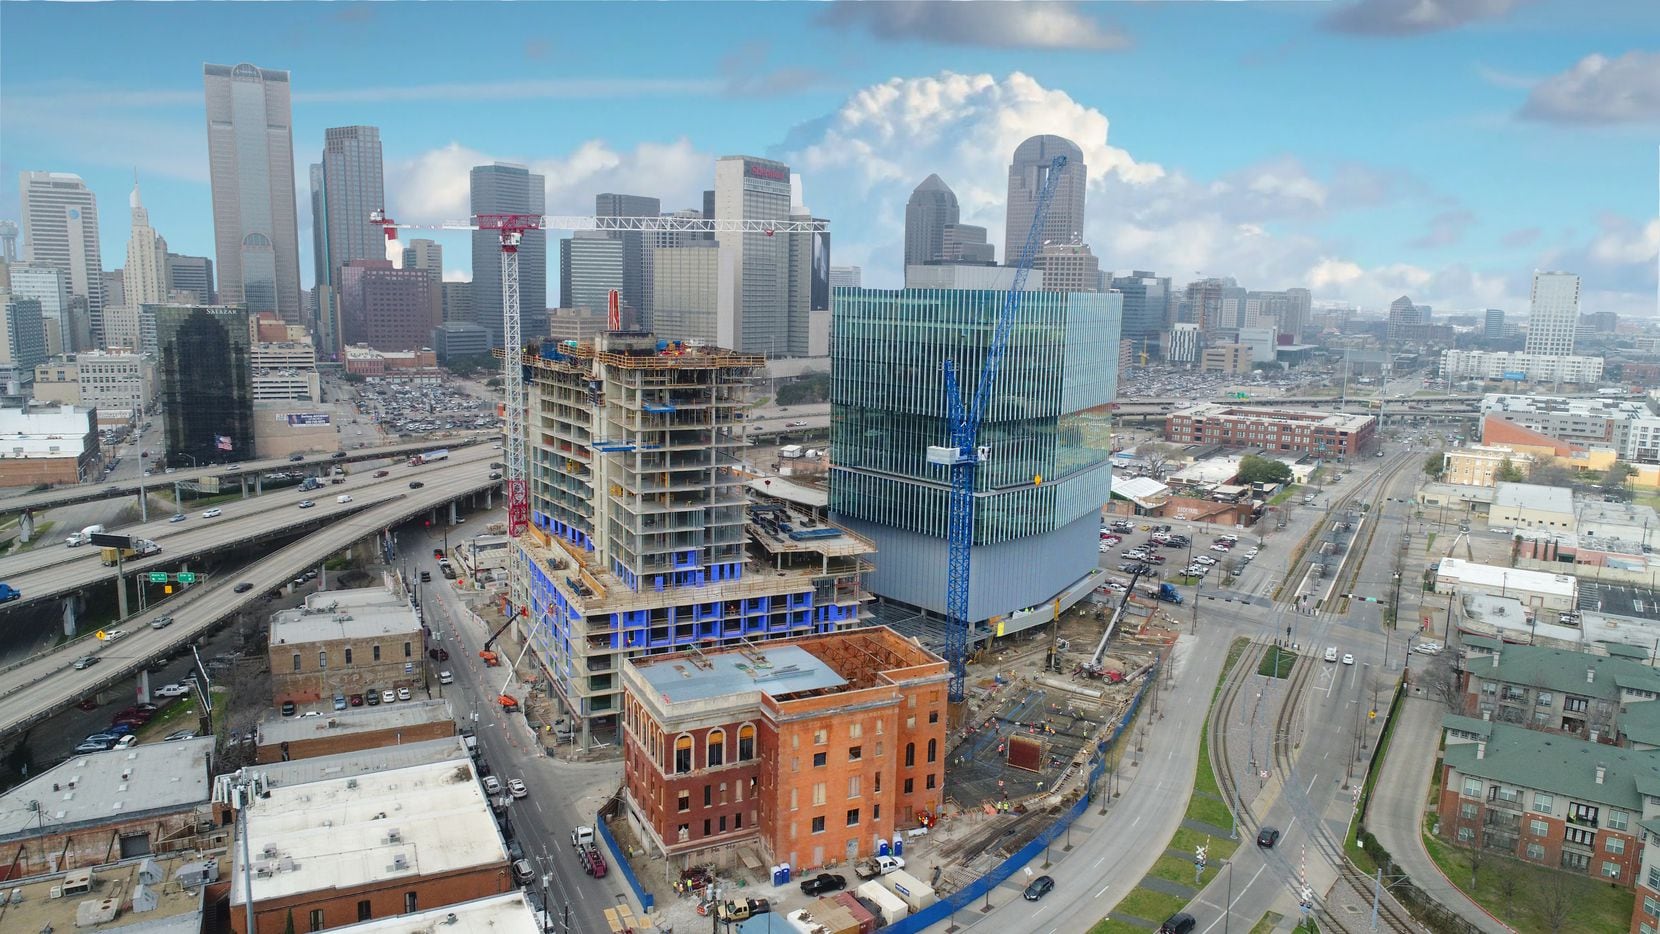 Deep Ellum S Huge Epic Development Moves Closer To Opening With New Office And Retail Tenants